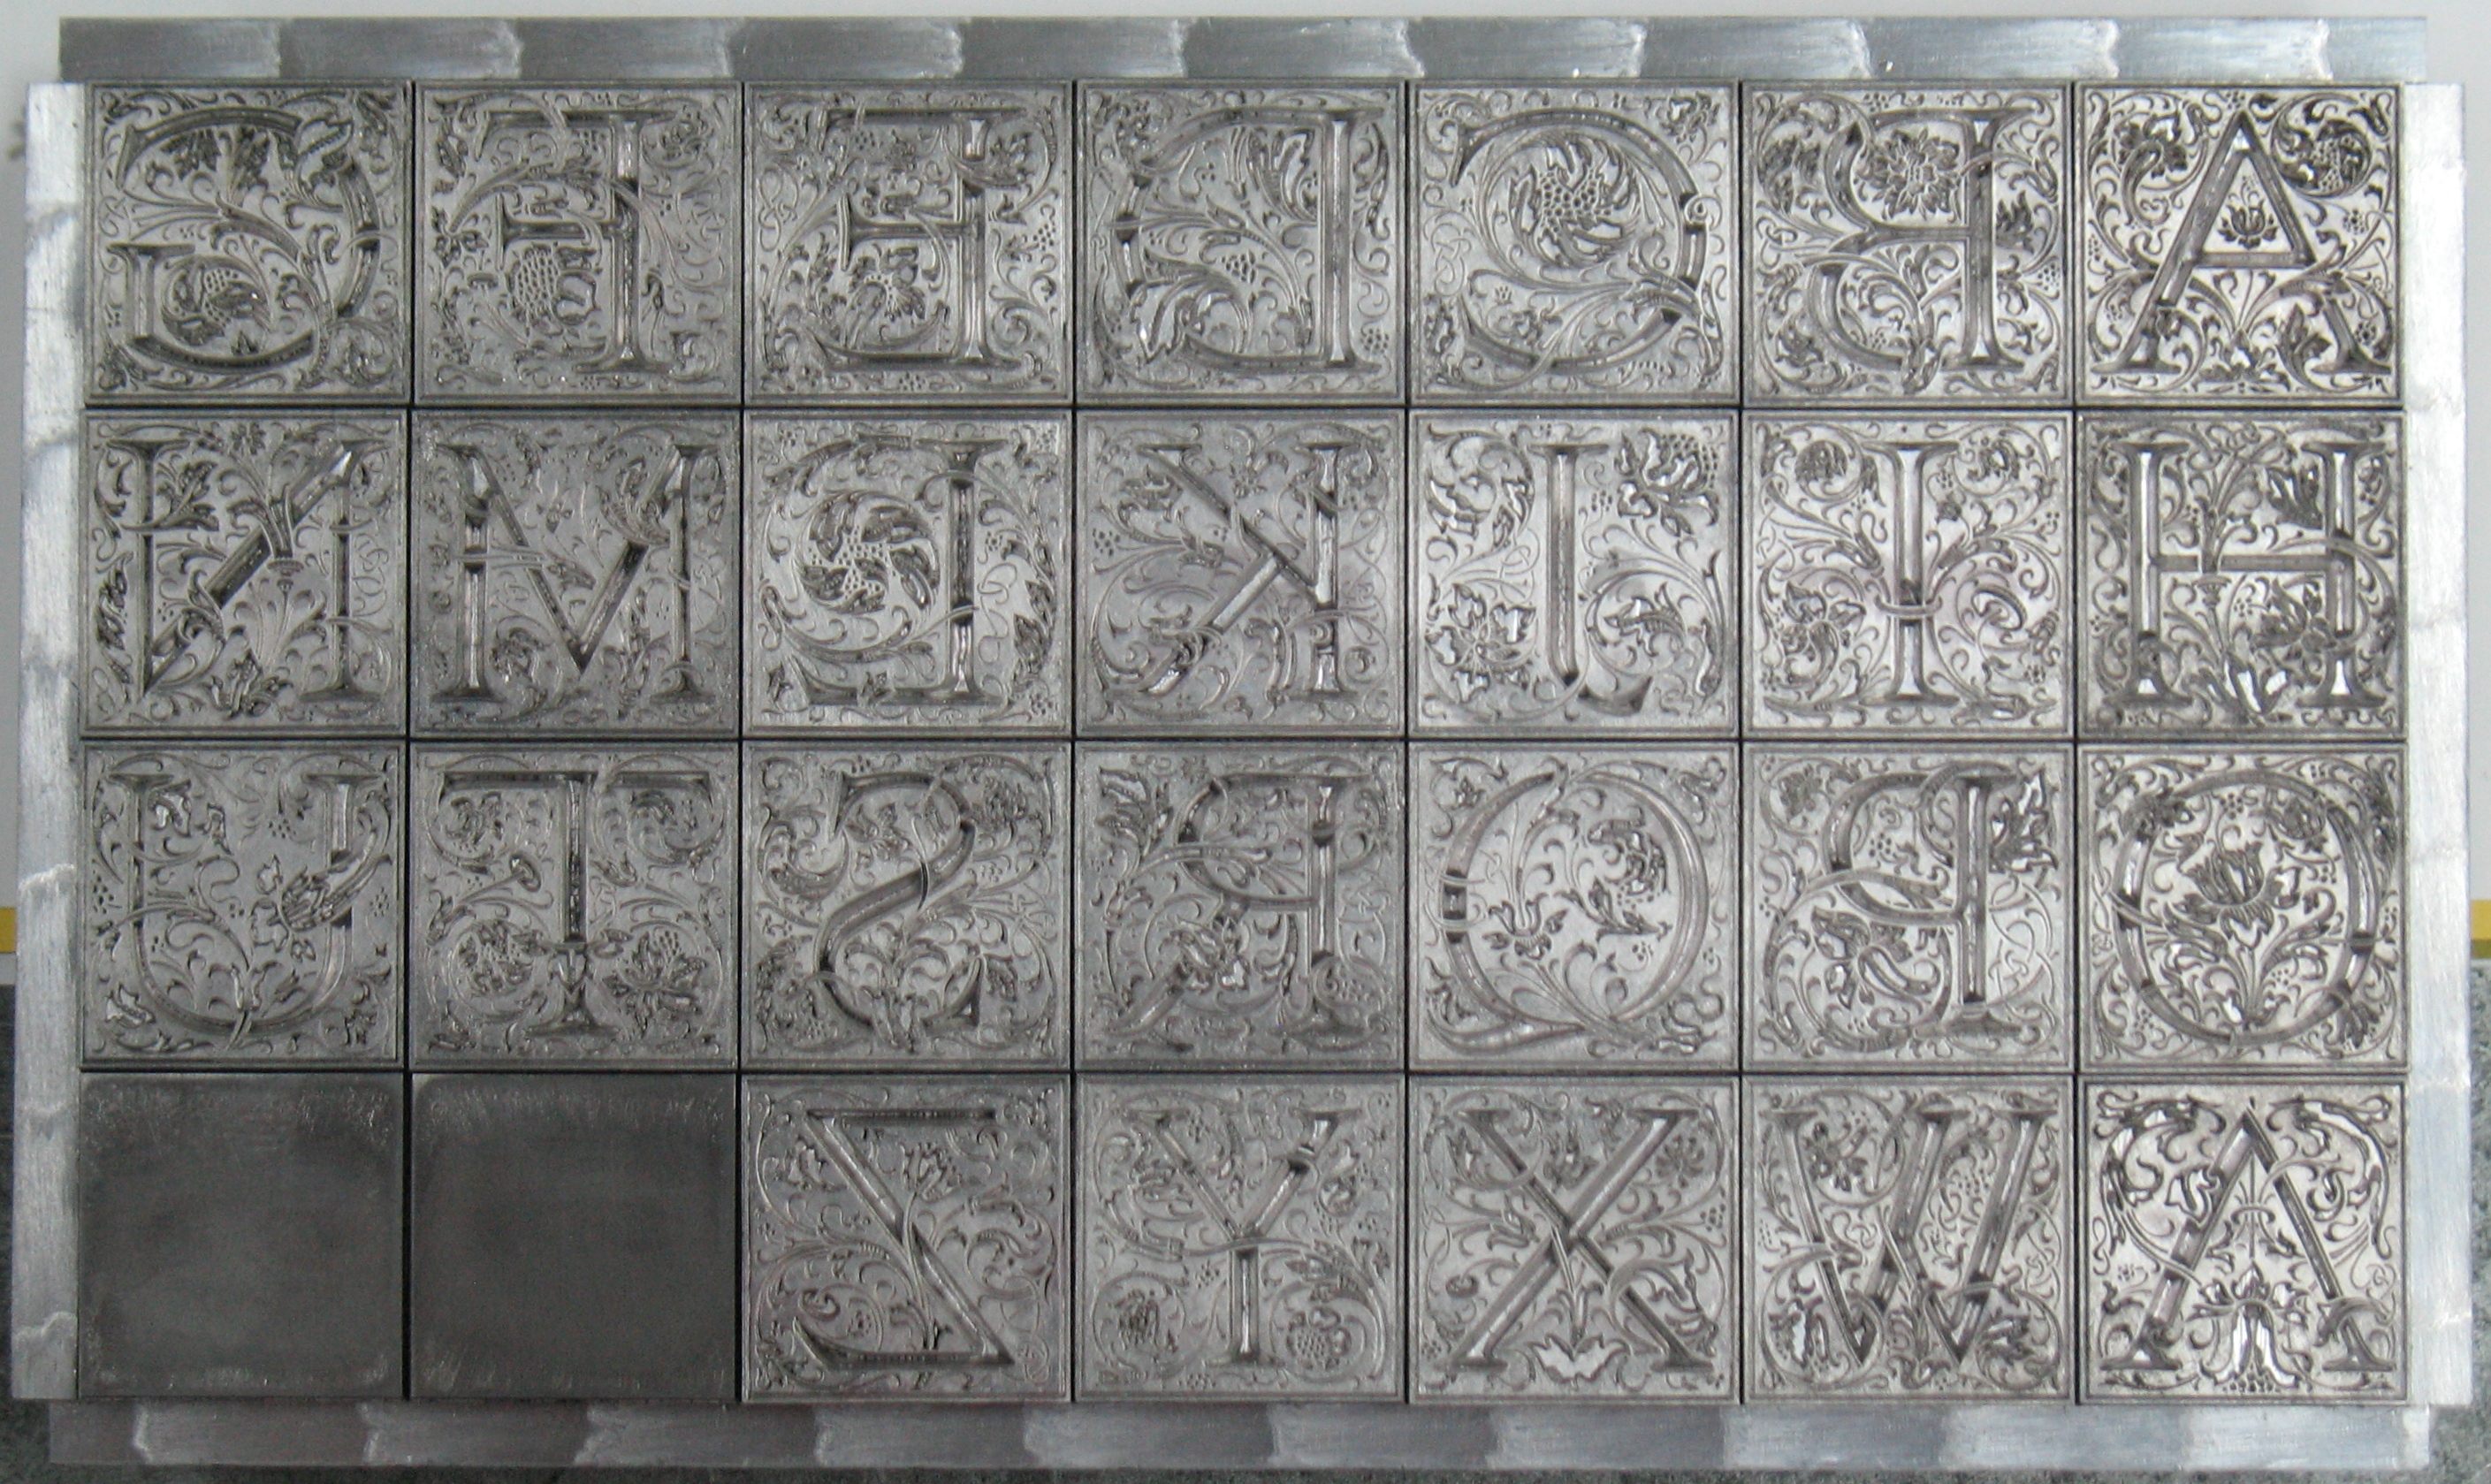 60-point Goudy Cloister Initials. The extra types are supposed to be tint blocks but their matrices were in poor shape and they did not turn out very well. Clearly I have to do a better job of cleaning my type after proofing these.